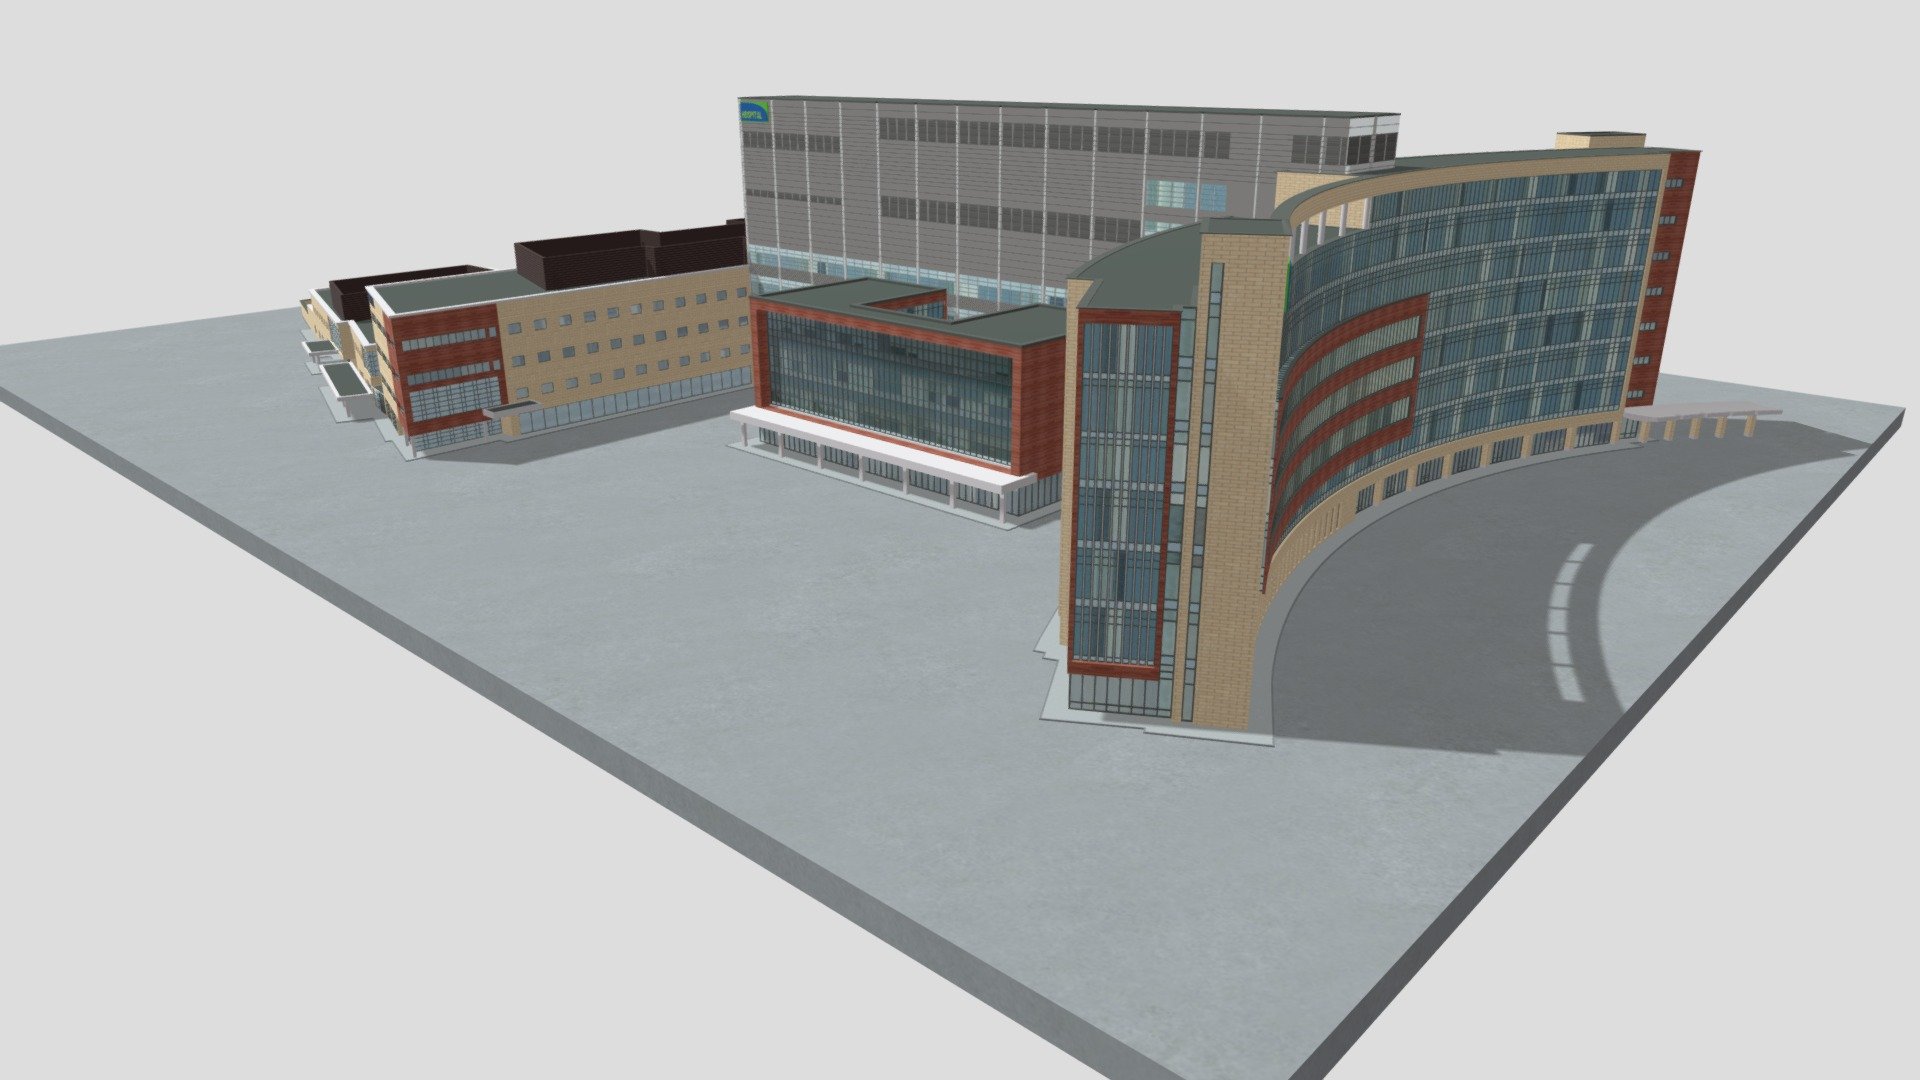 Hospital Building
Originally created with 3ds Max 2015 and rendered in V-Ray 3.0. 

Total Poly Counts:
Poly Count = 197191
Vertex Count = 301846

Please Visit:
https://nuralam3d.blogspot.com/2021/11/hospital-building.html - Hospital Building - 3D model by nuralam018 3d model